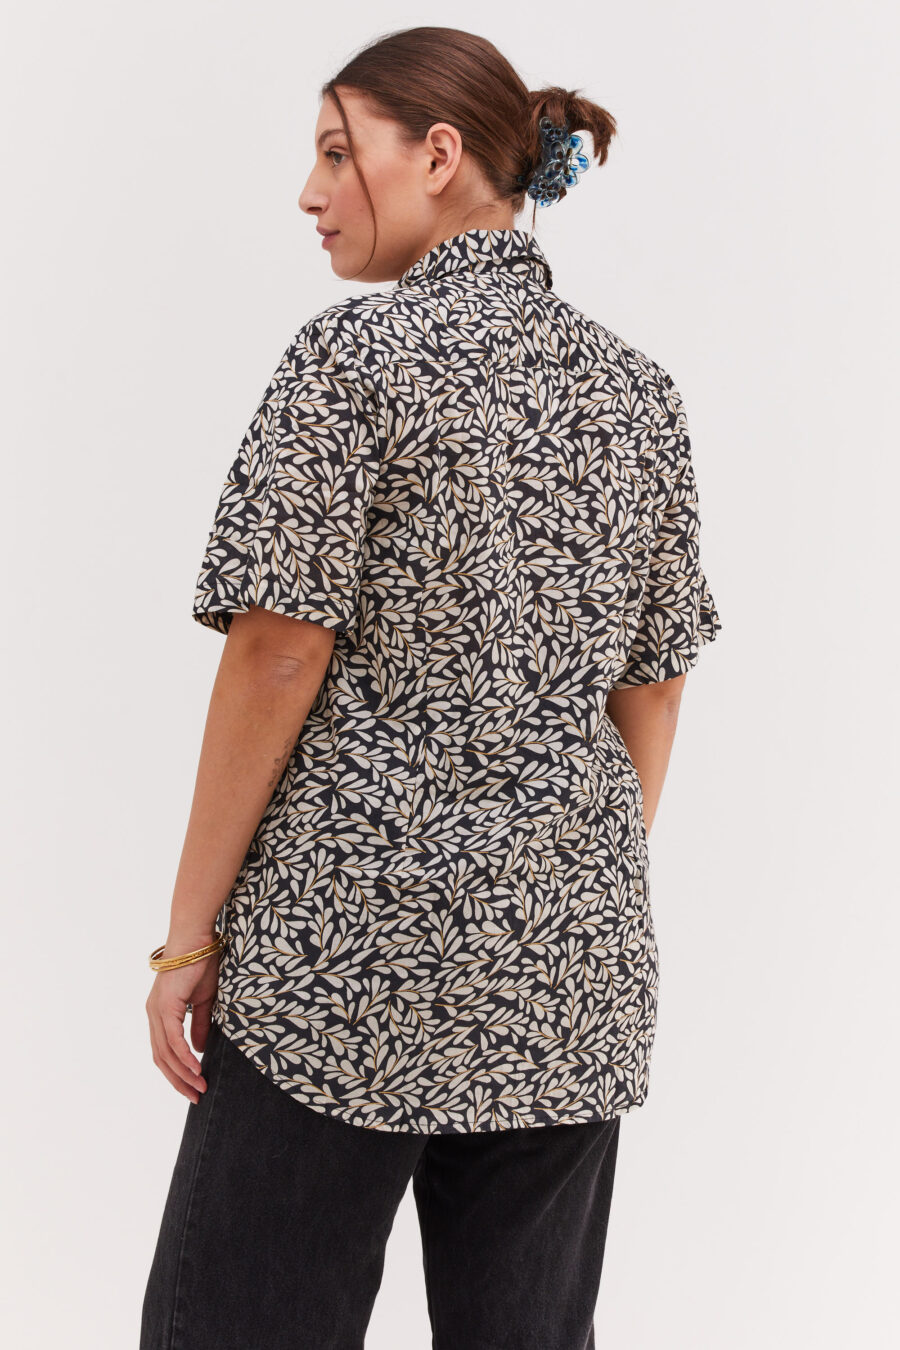 Unisex buttoned shirt for men and women | Olive leaves print on black charcoal background.